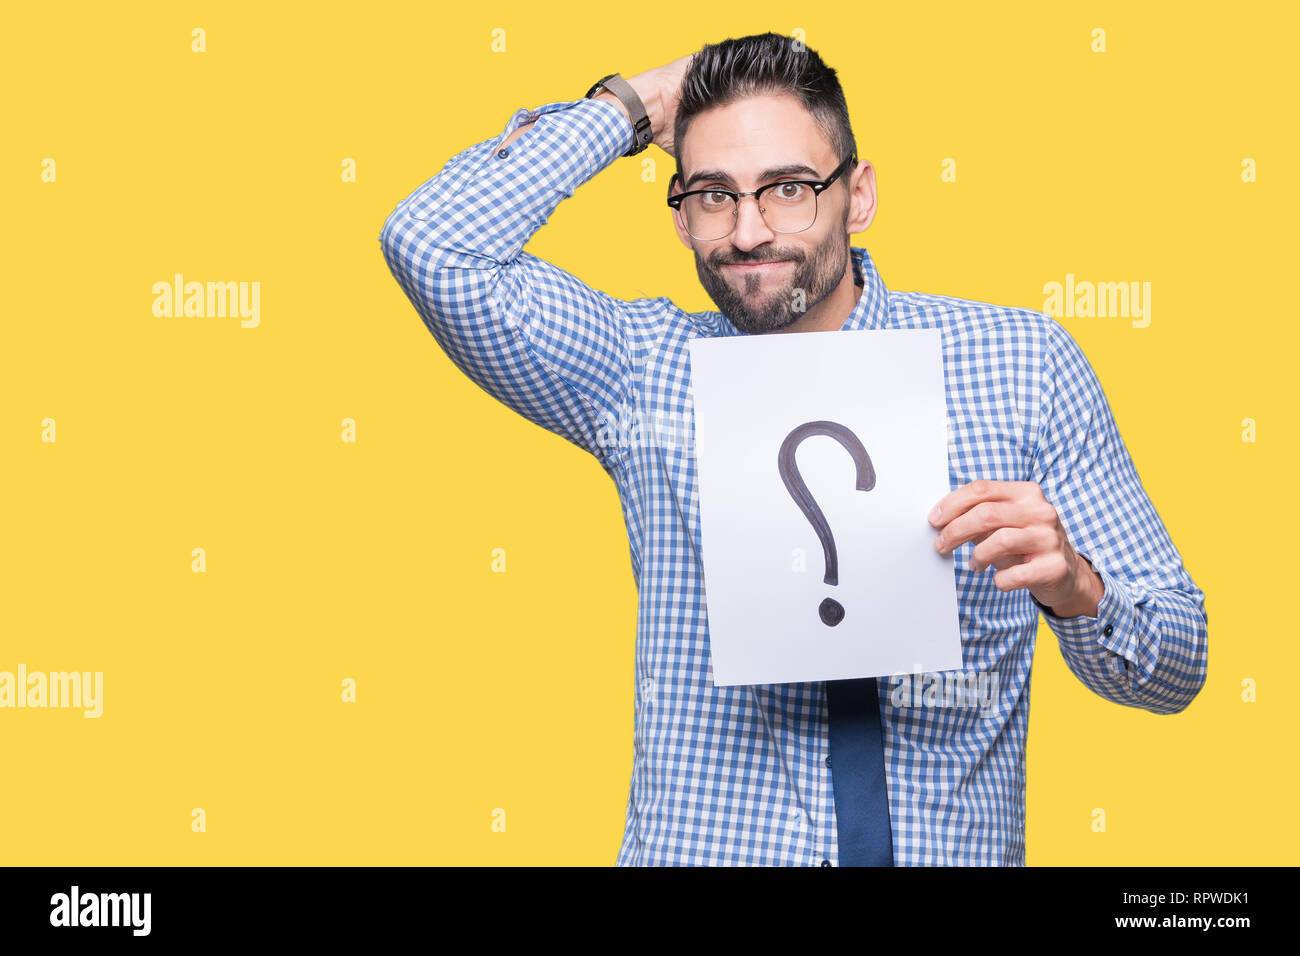 Handsome young business man holding paper with question mark over isolated background stressed with hand on head, shocked with shame and surprise face Stock Photo